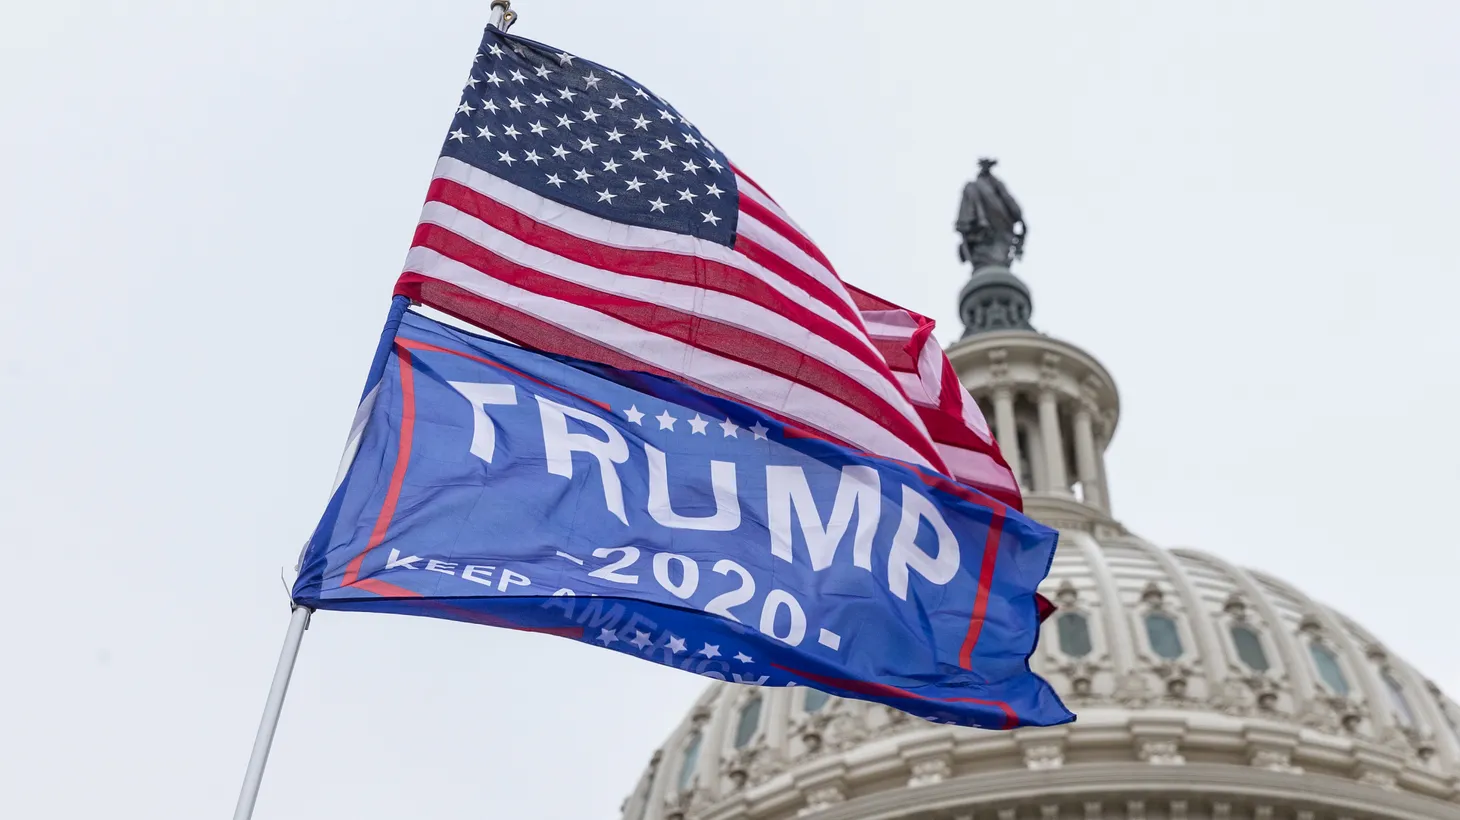 USA and Trump 2020 flags fly on the same pole during the January 6 attack on the U.S. Capitol in Washington, D.C., U.S., January 6, 2021.